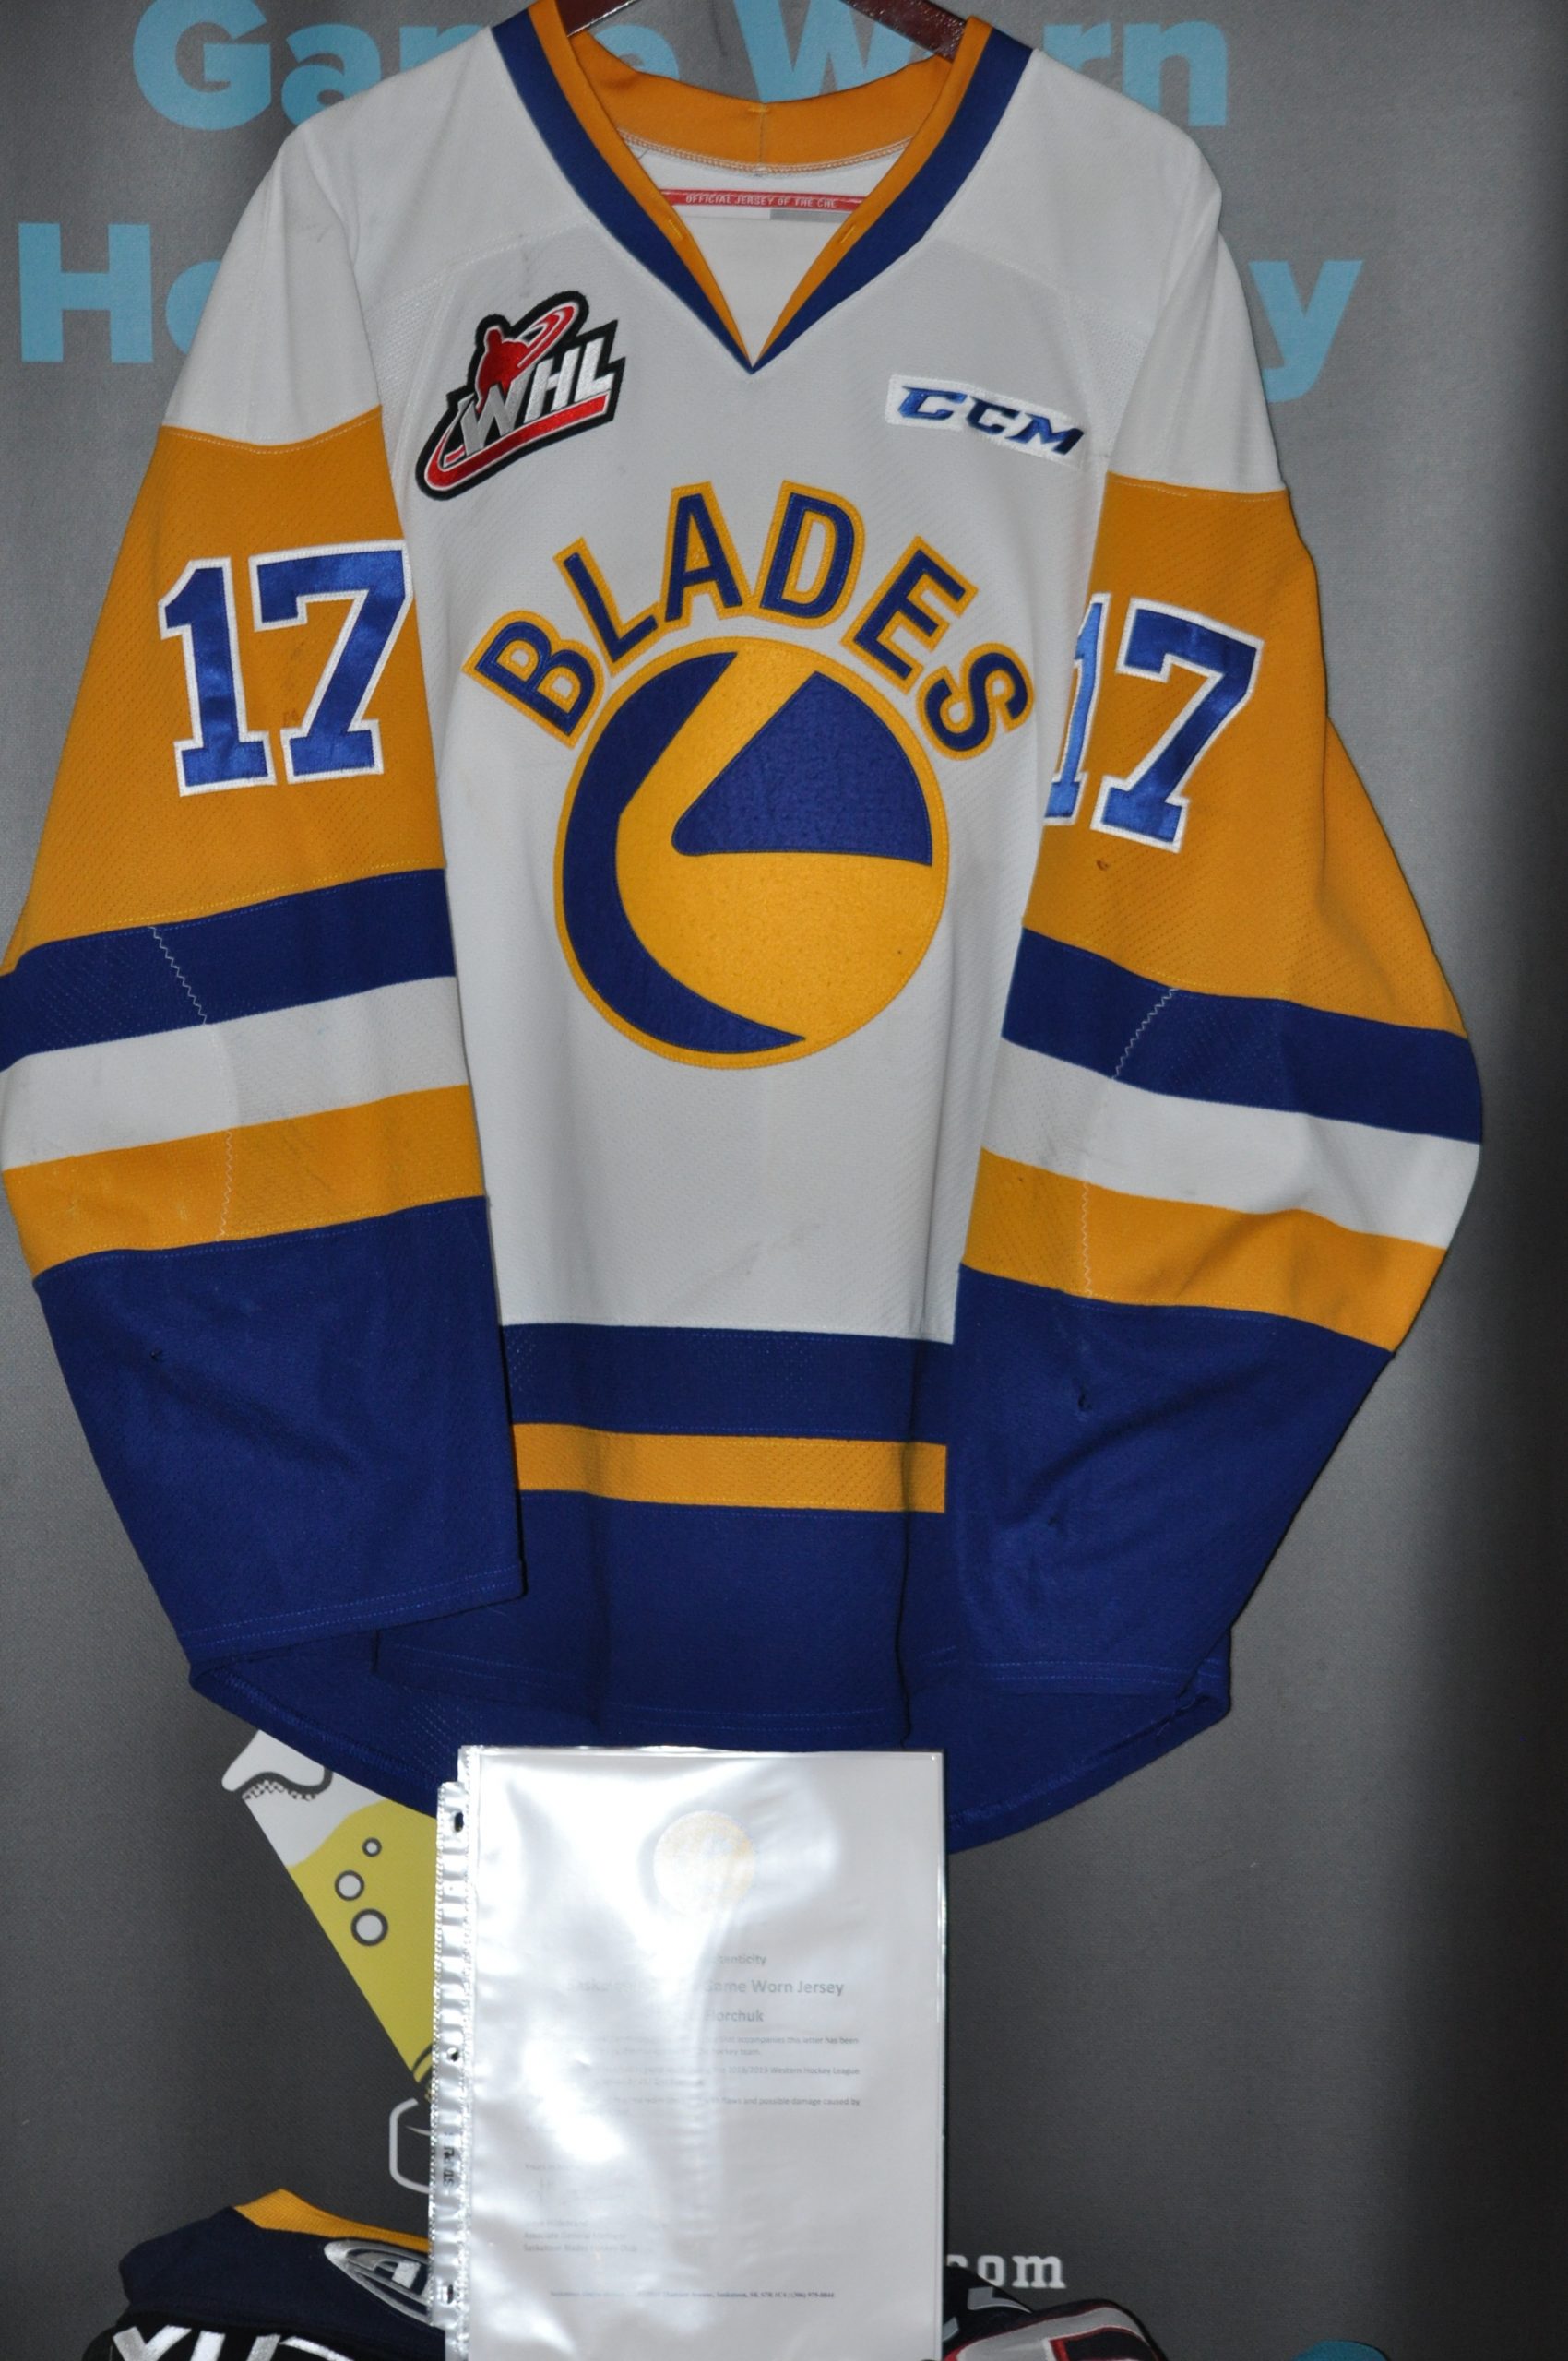 Saskatoon Blades Hockey Club - Jerseys are cool. Game-worn jerseys are even  cooler. OWN YOUR OWN, bit.ly/31z5Mm3